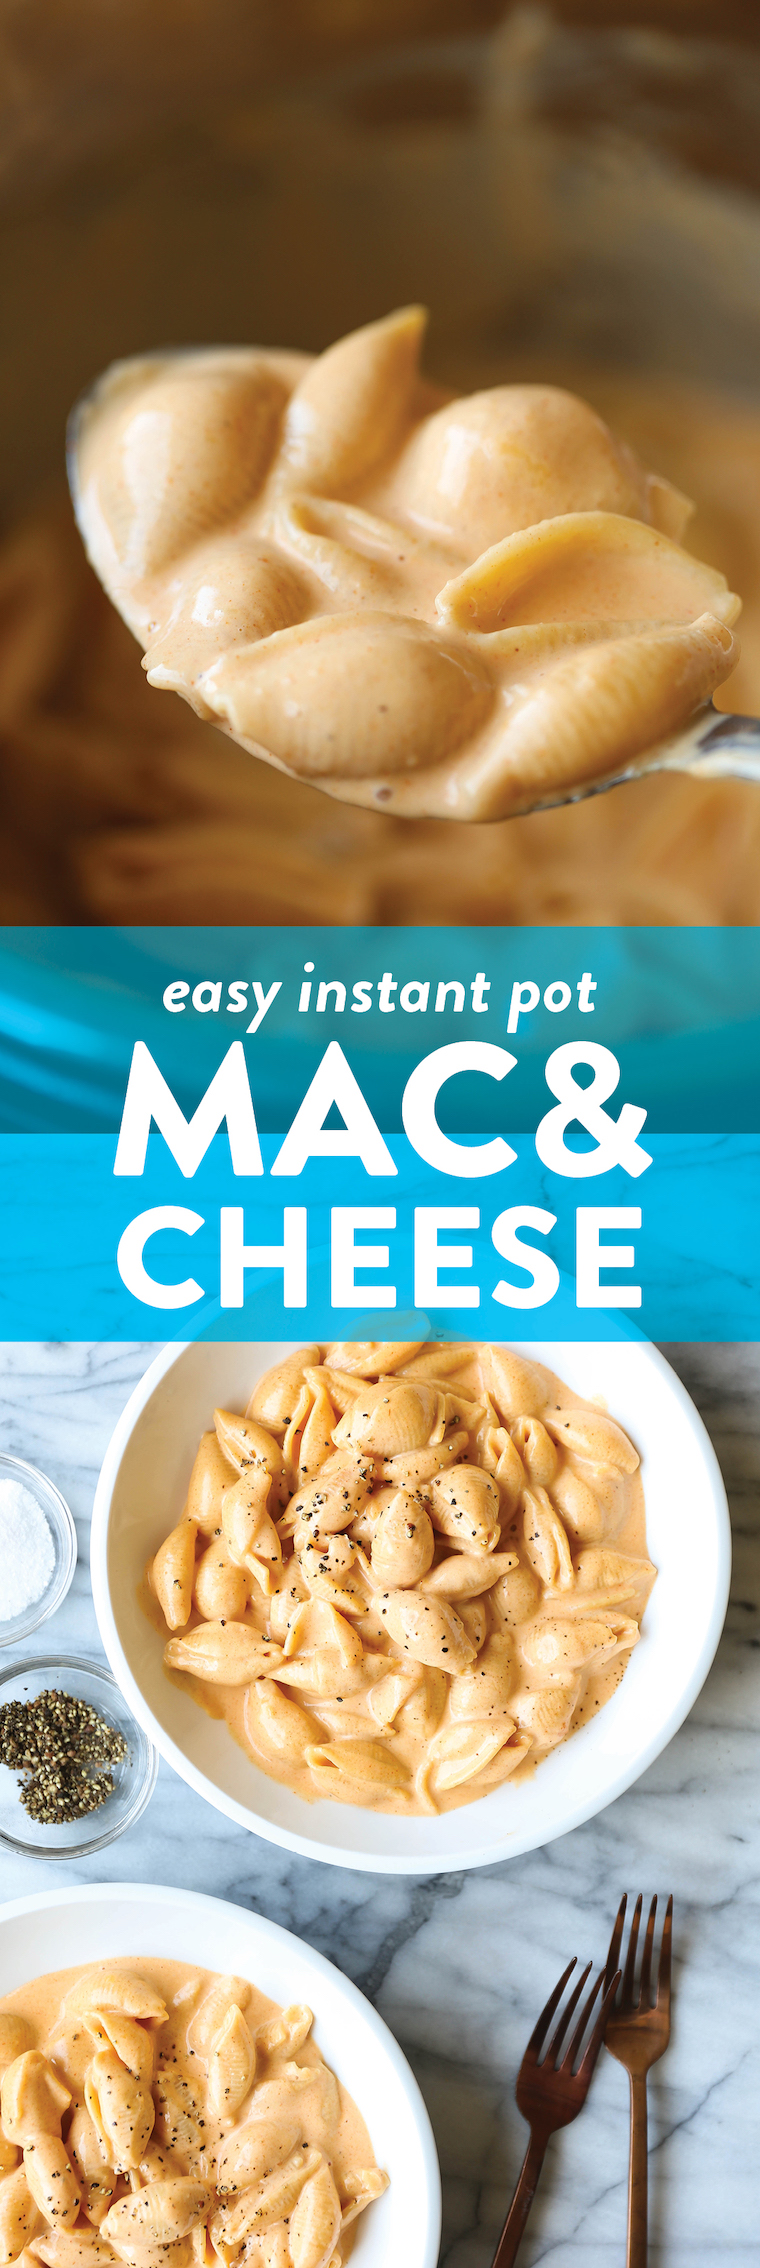 Easy Instant Pot Mac and Cheese - A super short ingredient list with just 6 min in the pressure cooker! So easy, quick, and unbelievably creamy. SO SO GOOD.